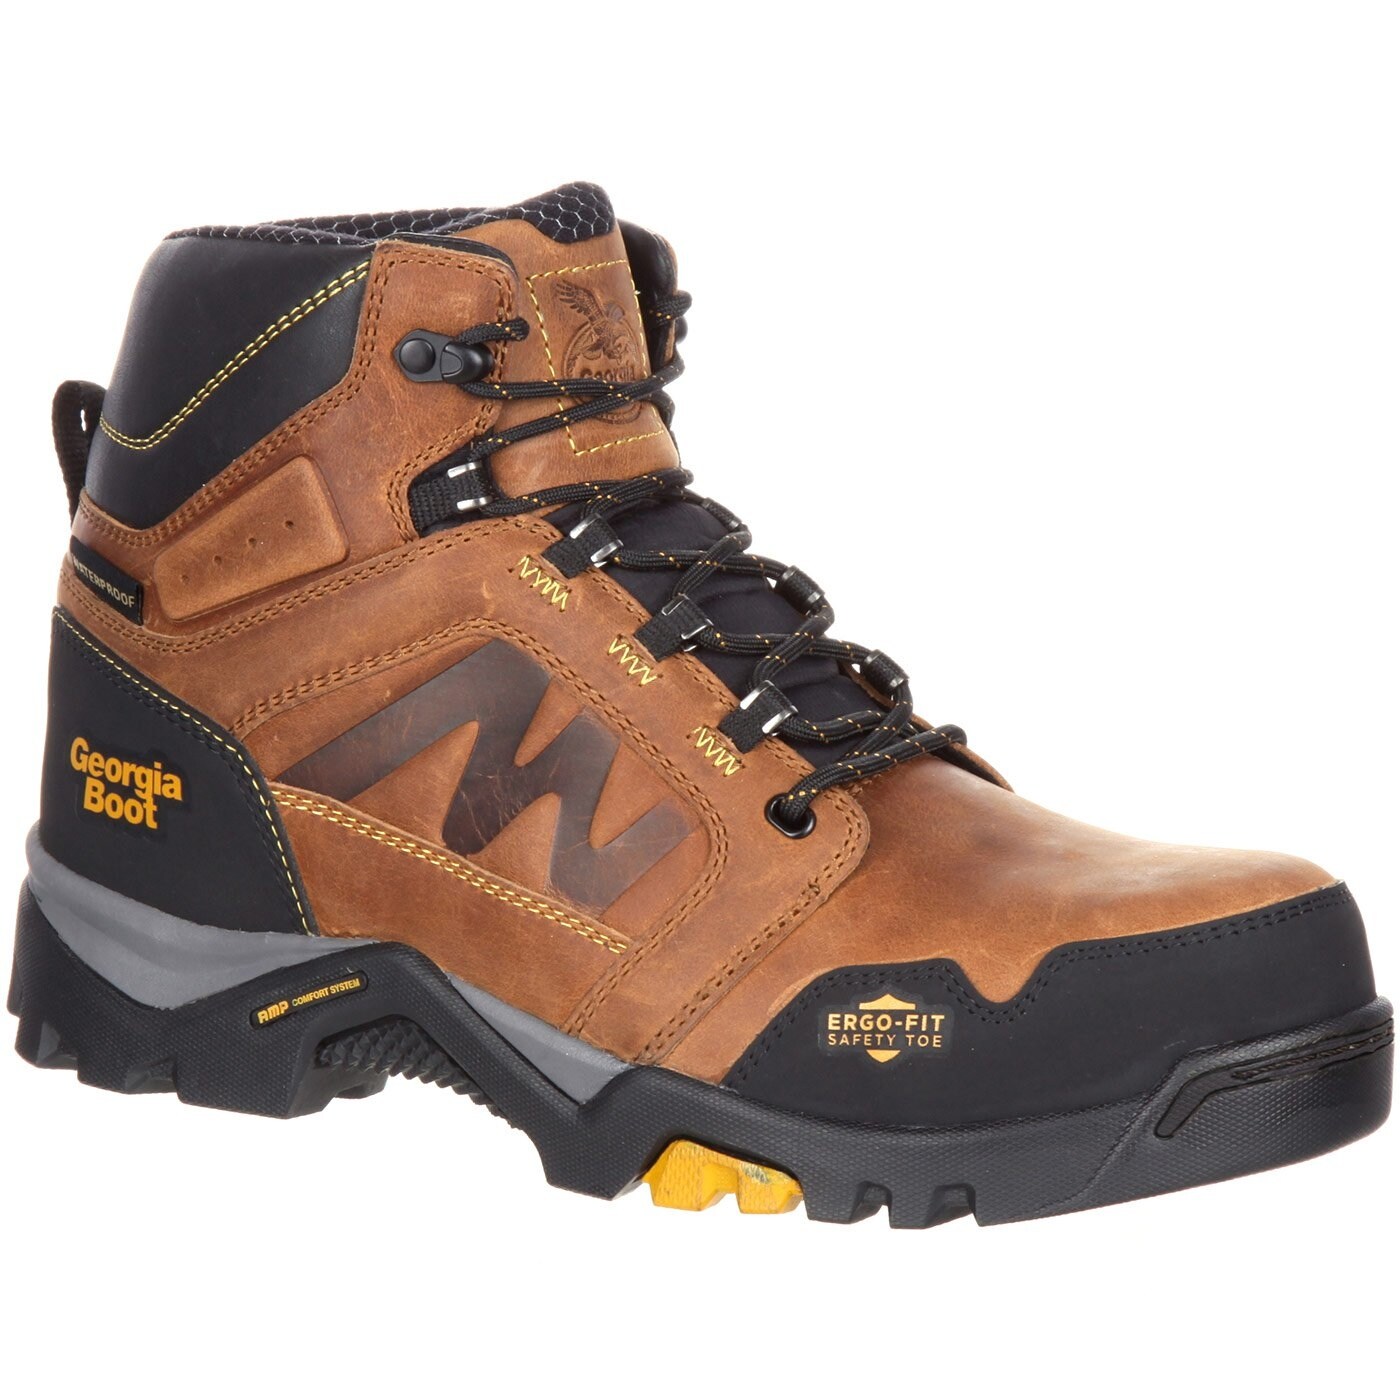 composite toe hiking boot